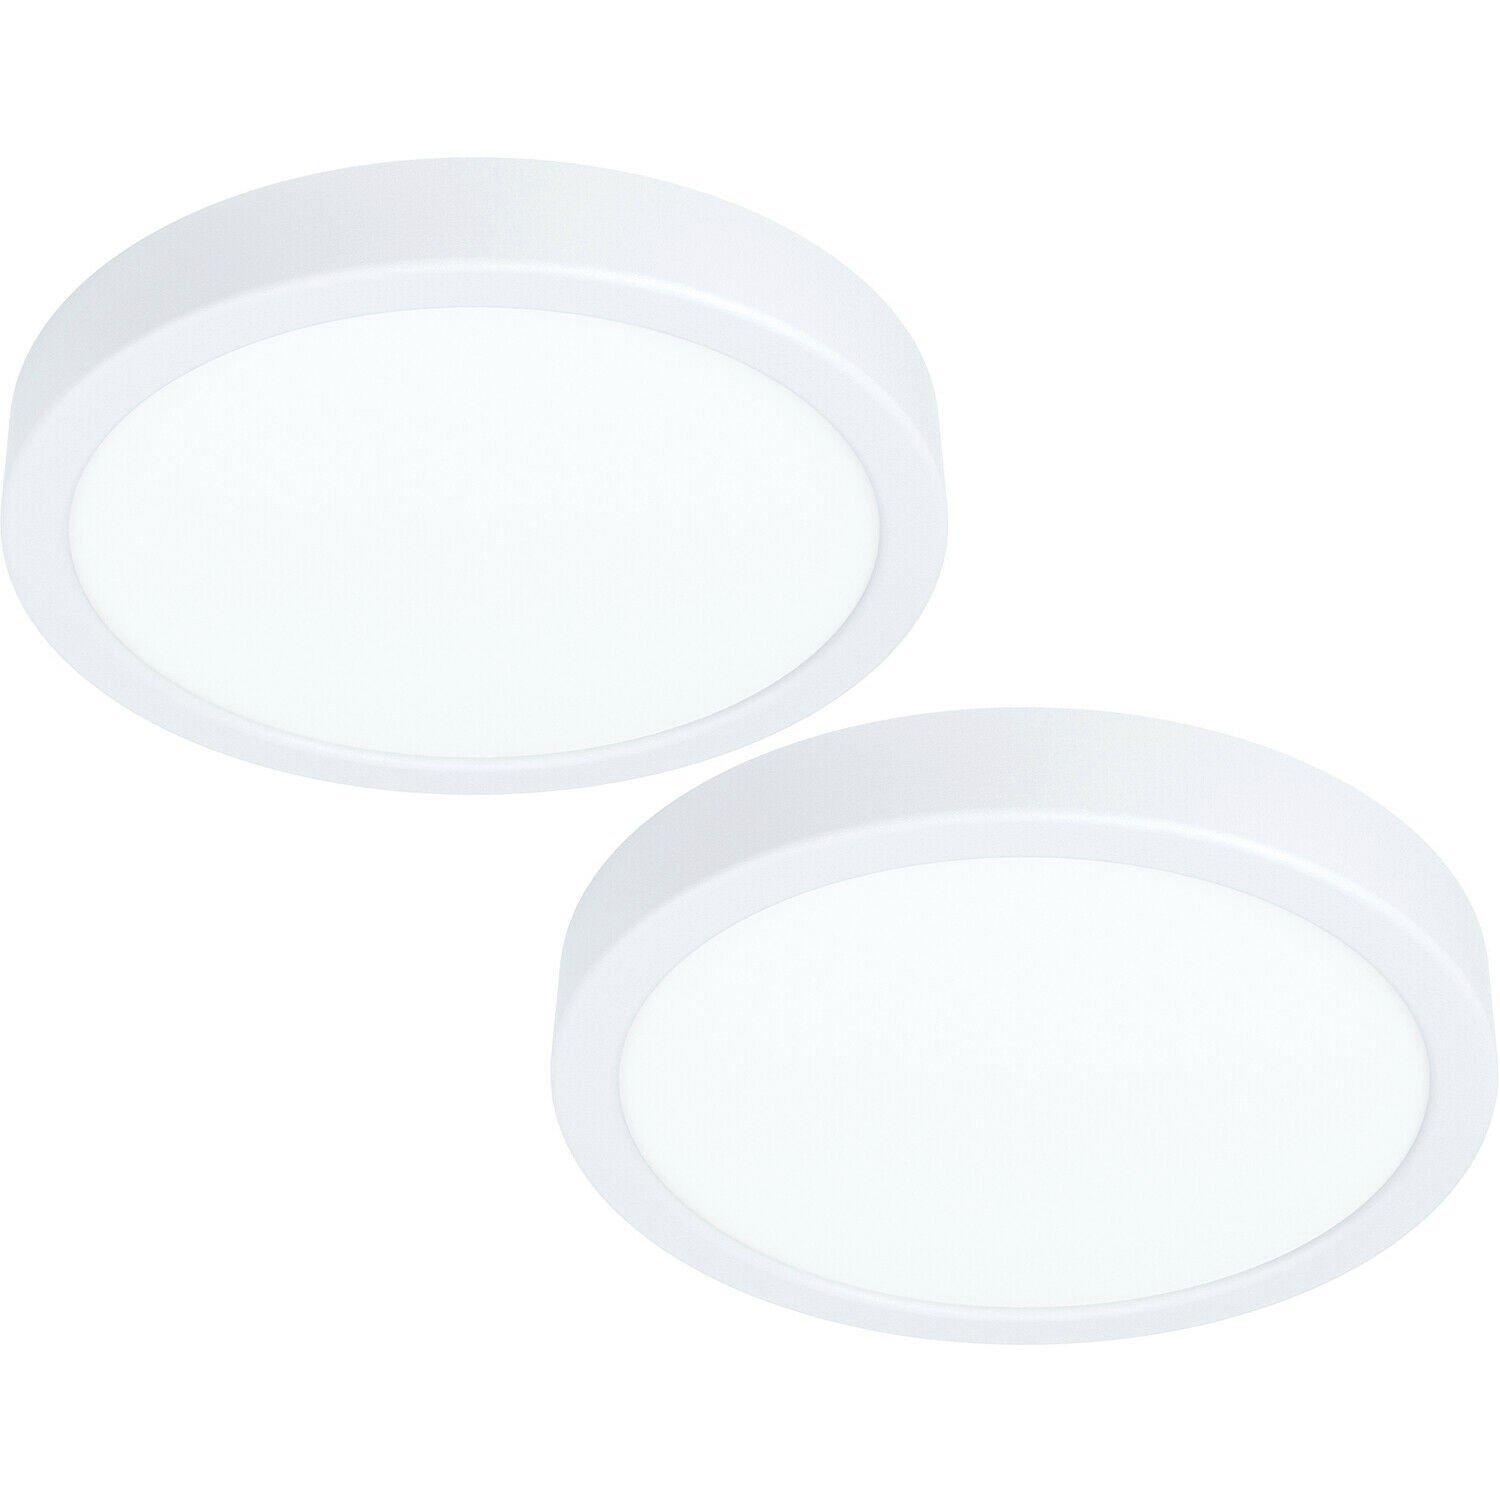 2 PACK Wall / Ceiling Light White 210mm Round Surface Mounted 16.5W LED 4000K